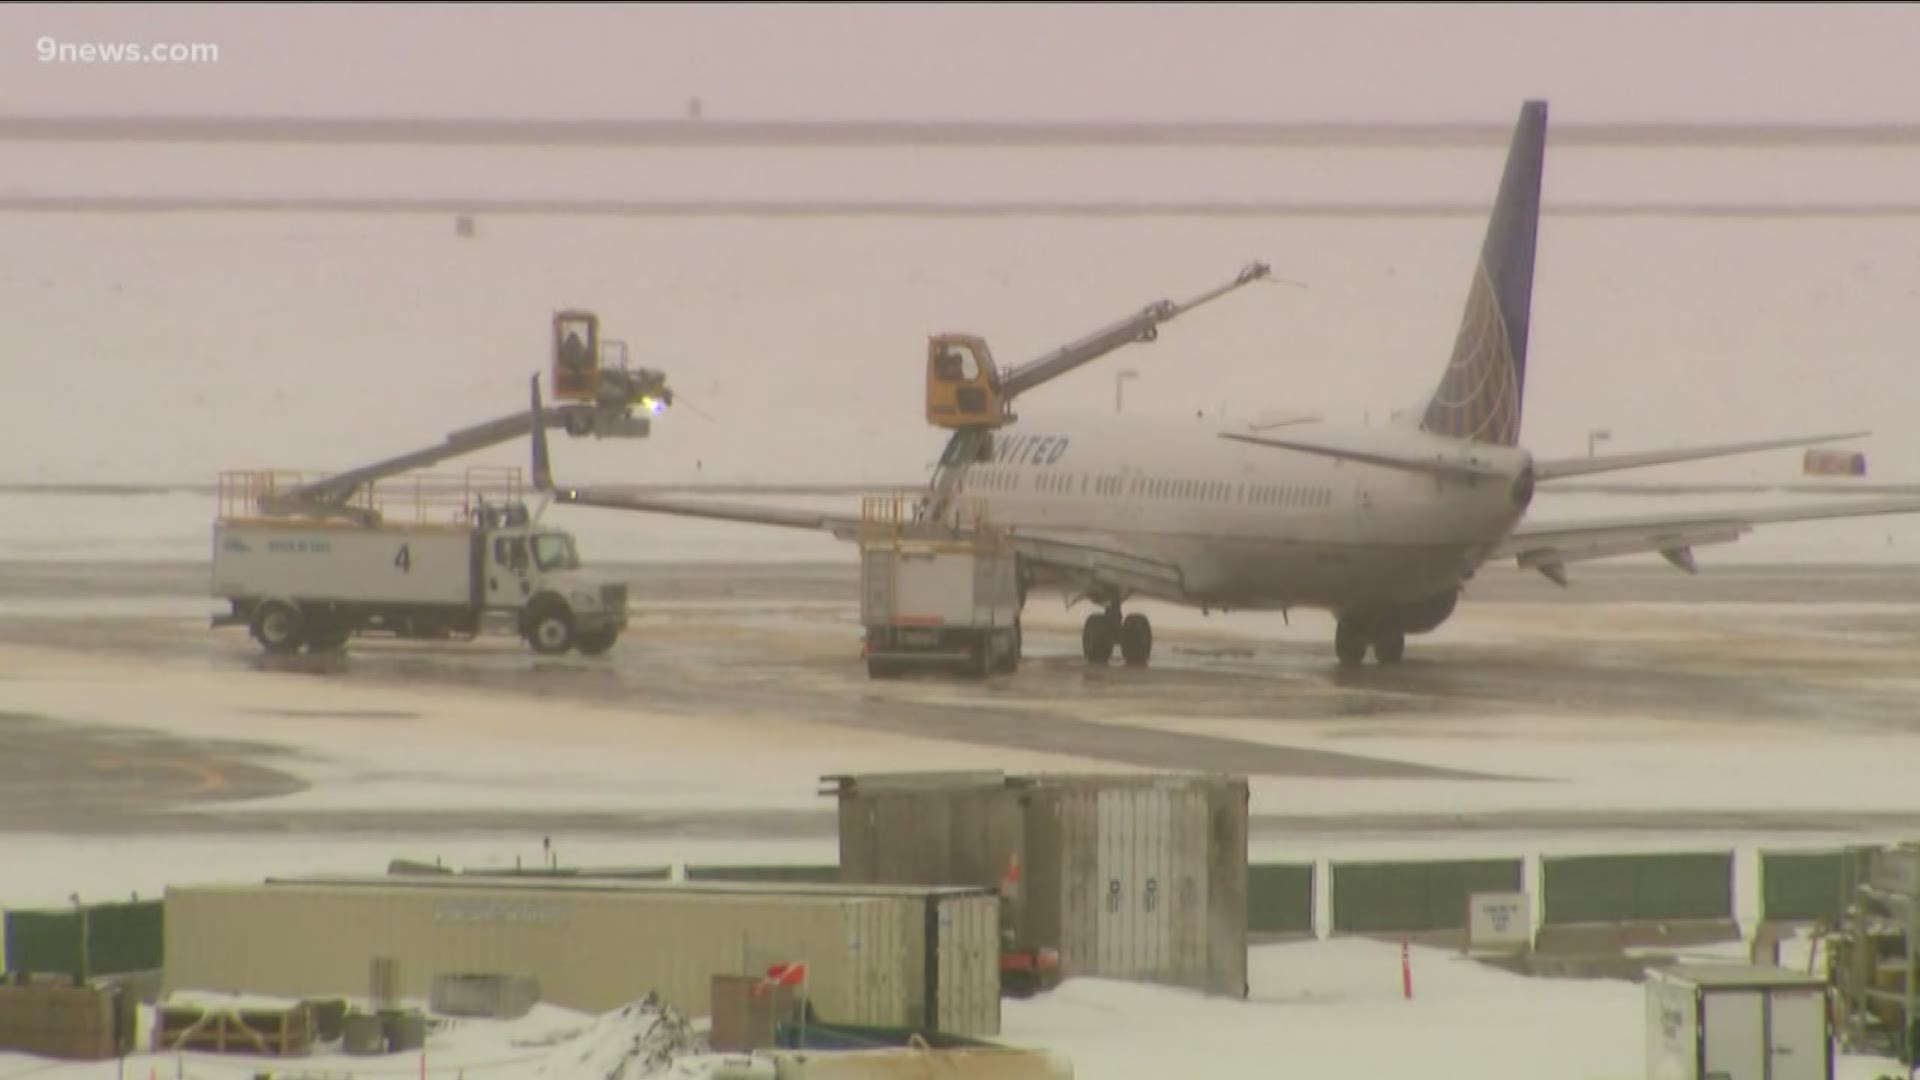 484 flights were canceled at DIA today, and another 500 were delayed. 1,100 people were stranded and had to spend the night at the airport.